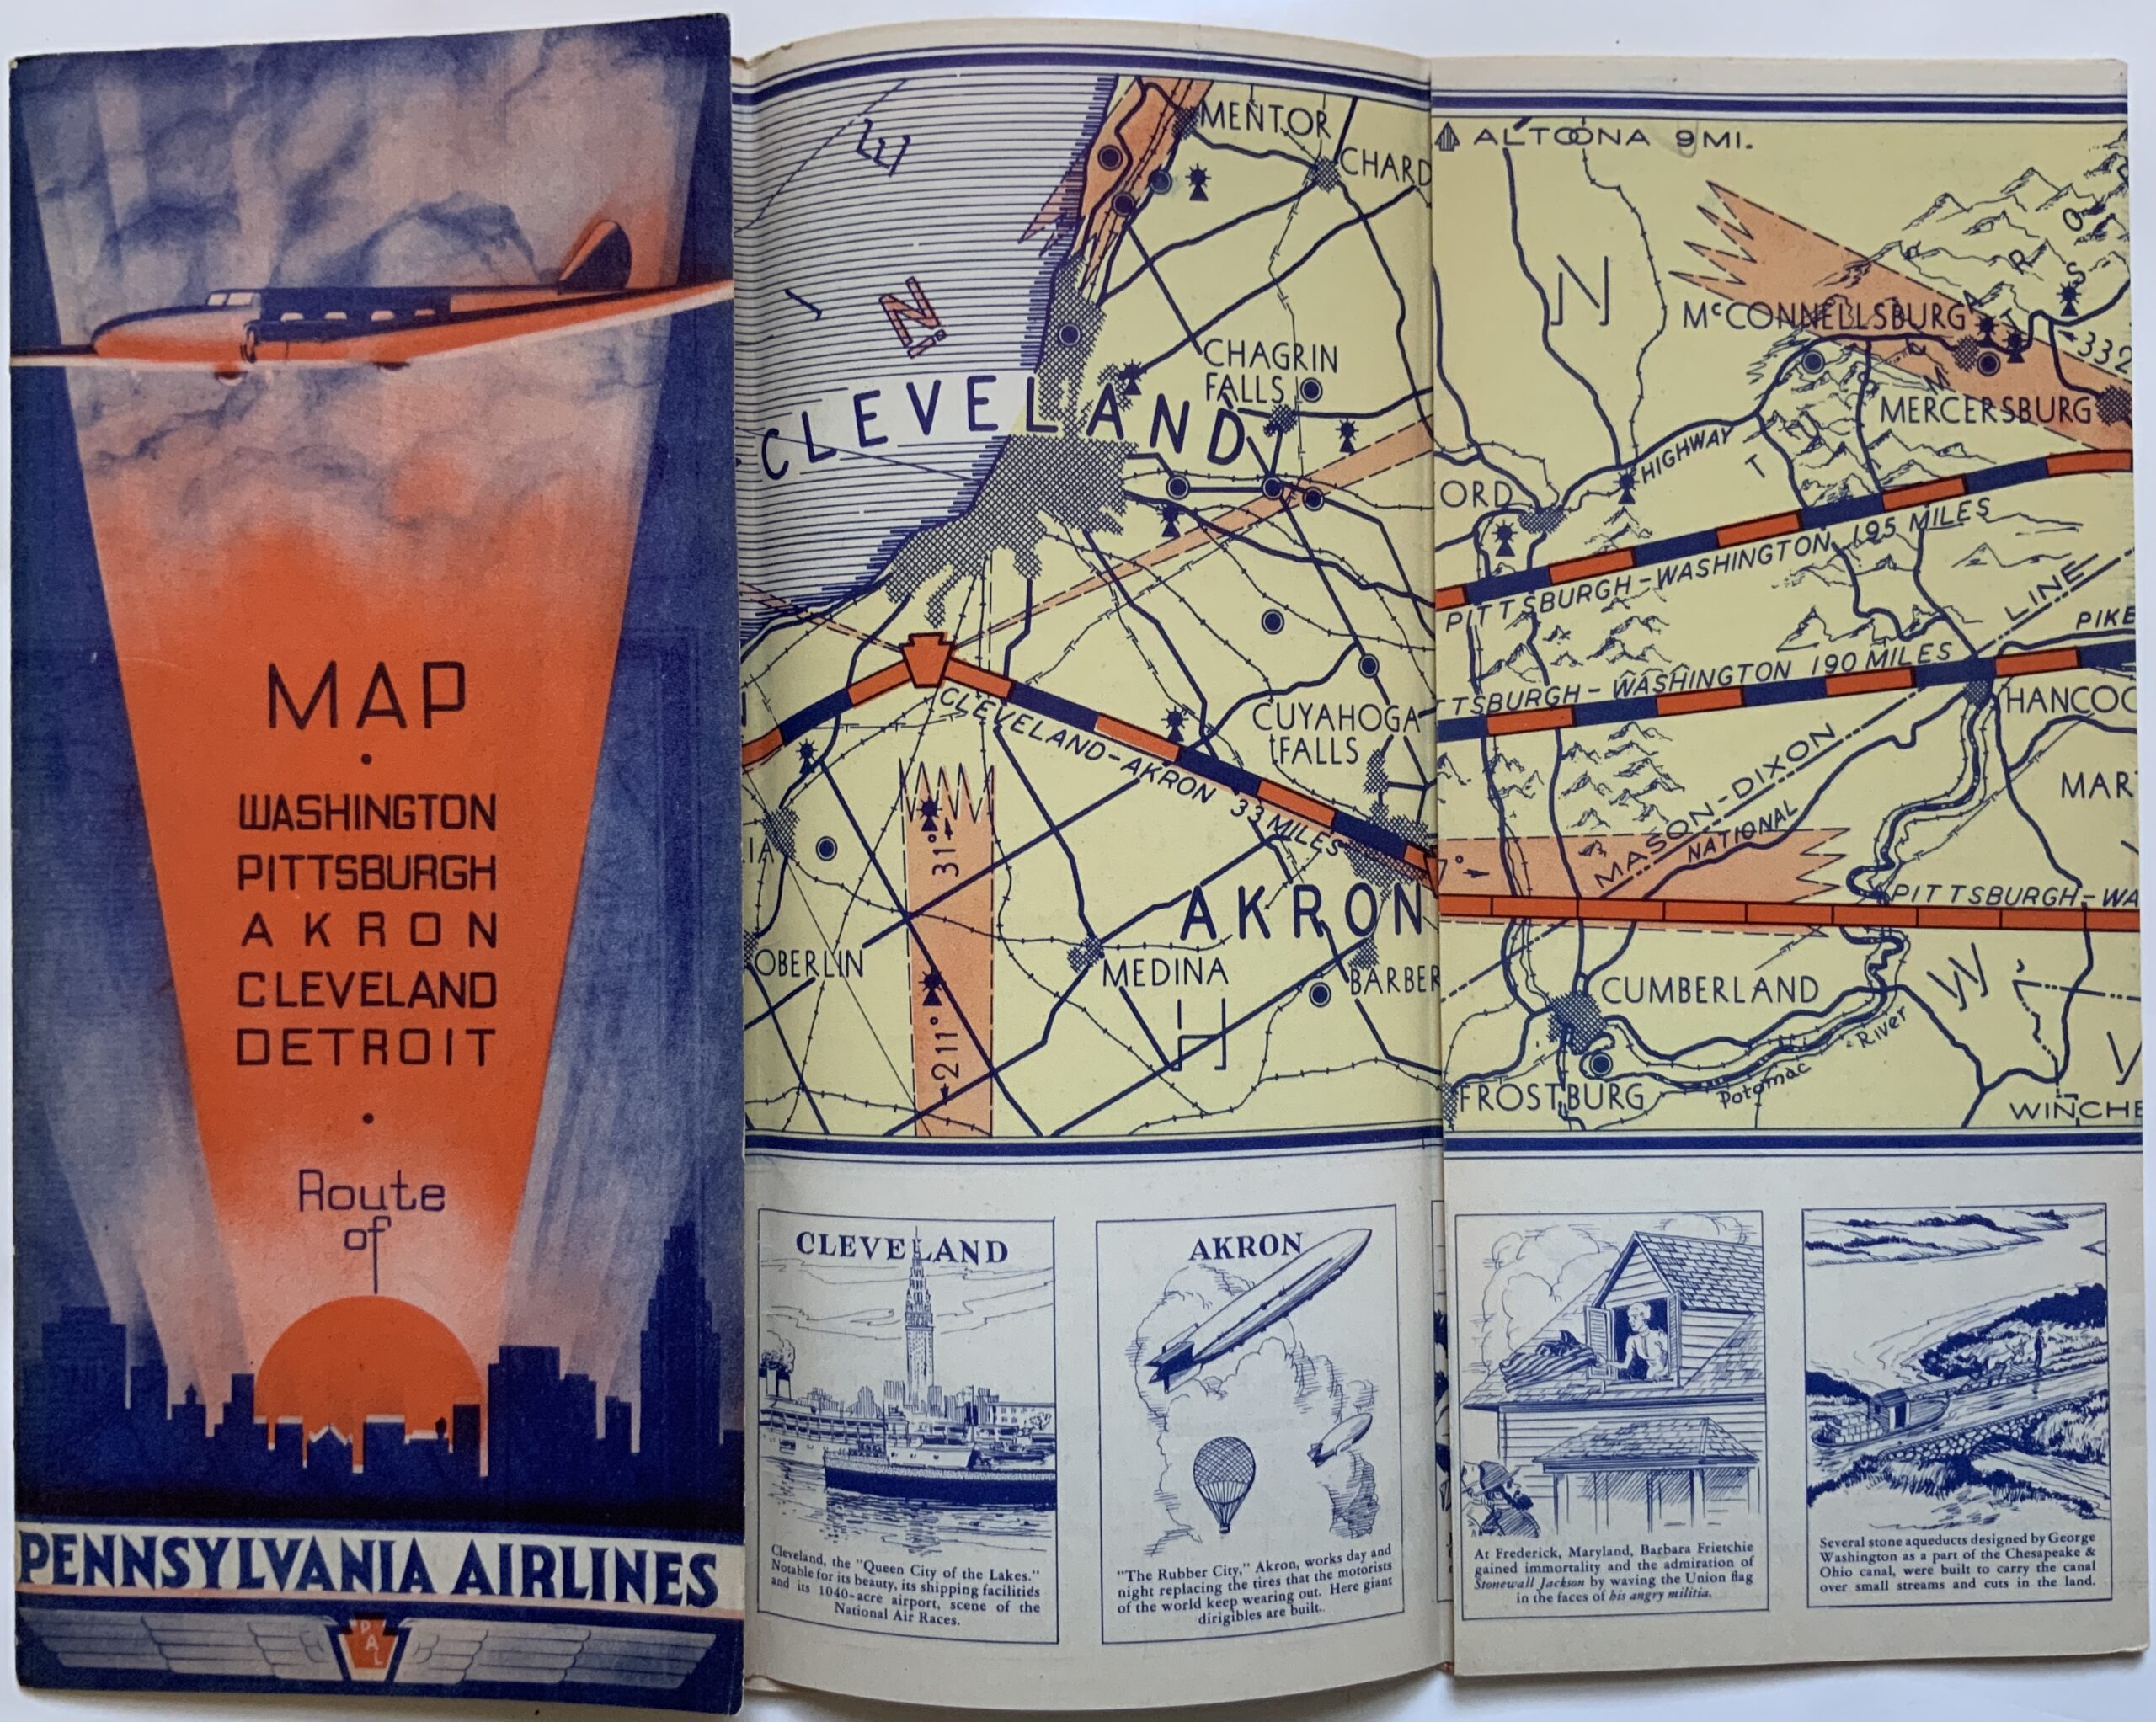 M213	MID-ATLANTIC AIRWAYS CA. 1935 EARLY AIRLINE, EXCEPTIONAL MAP